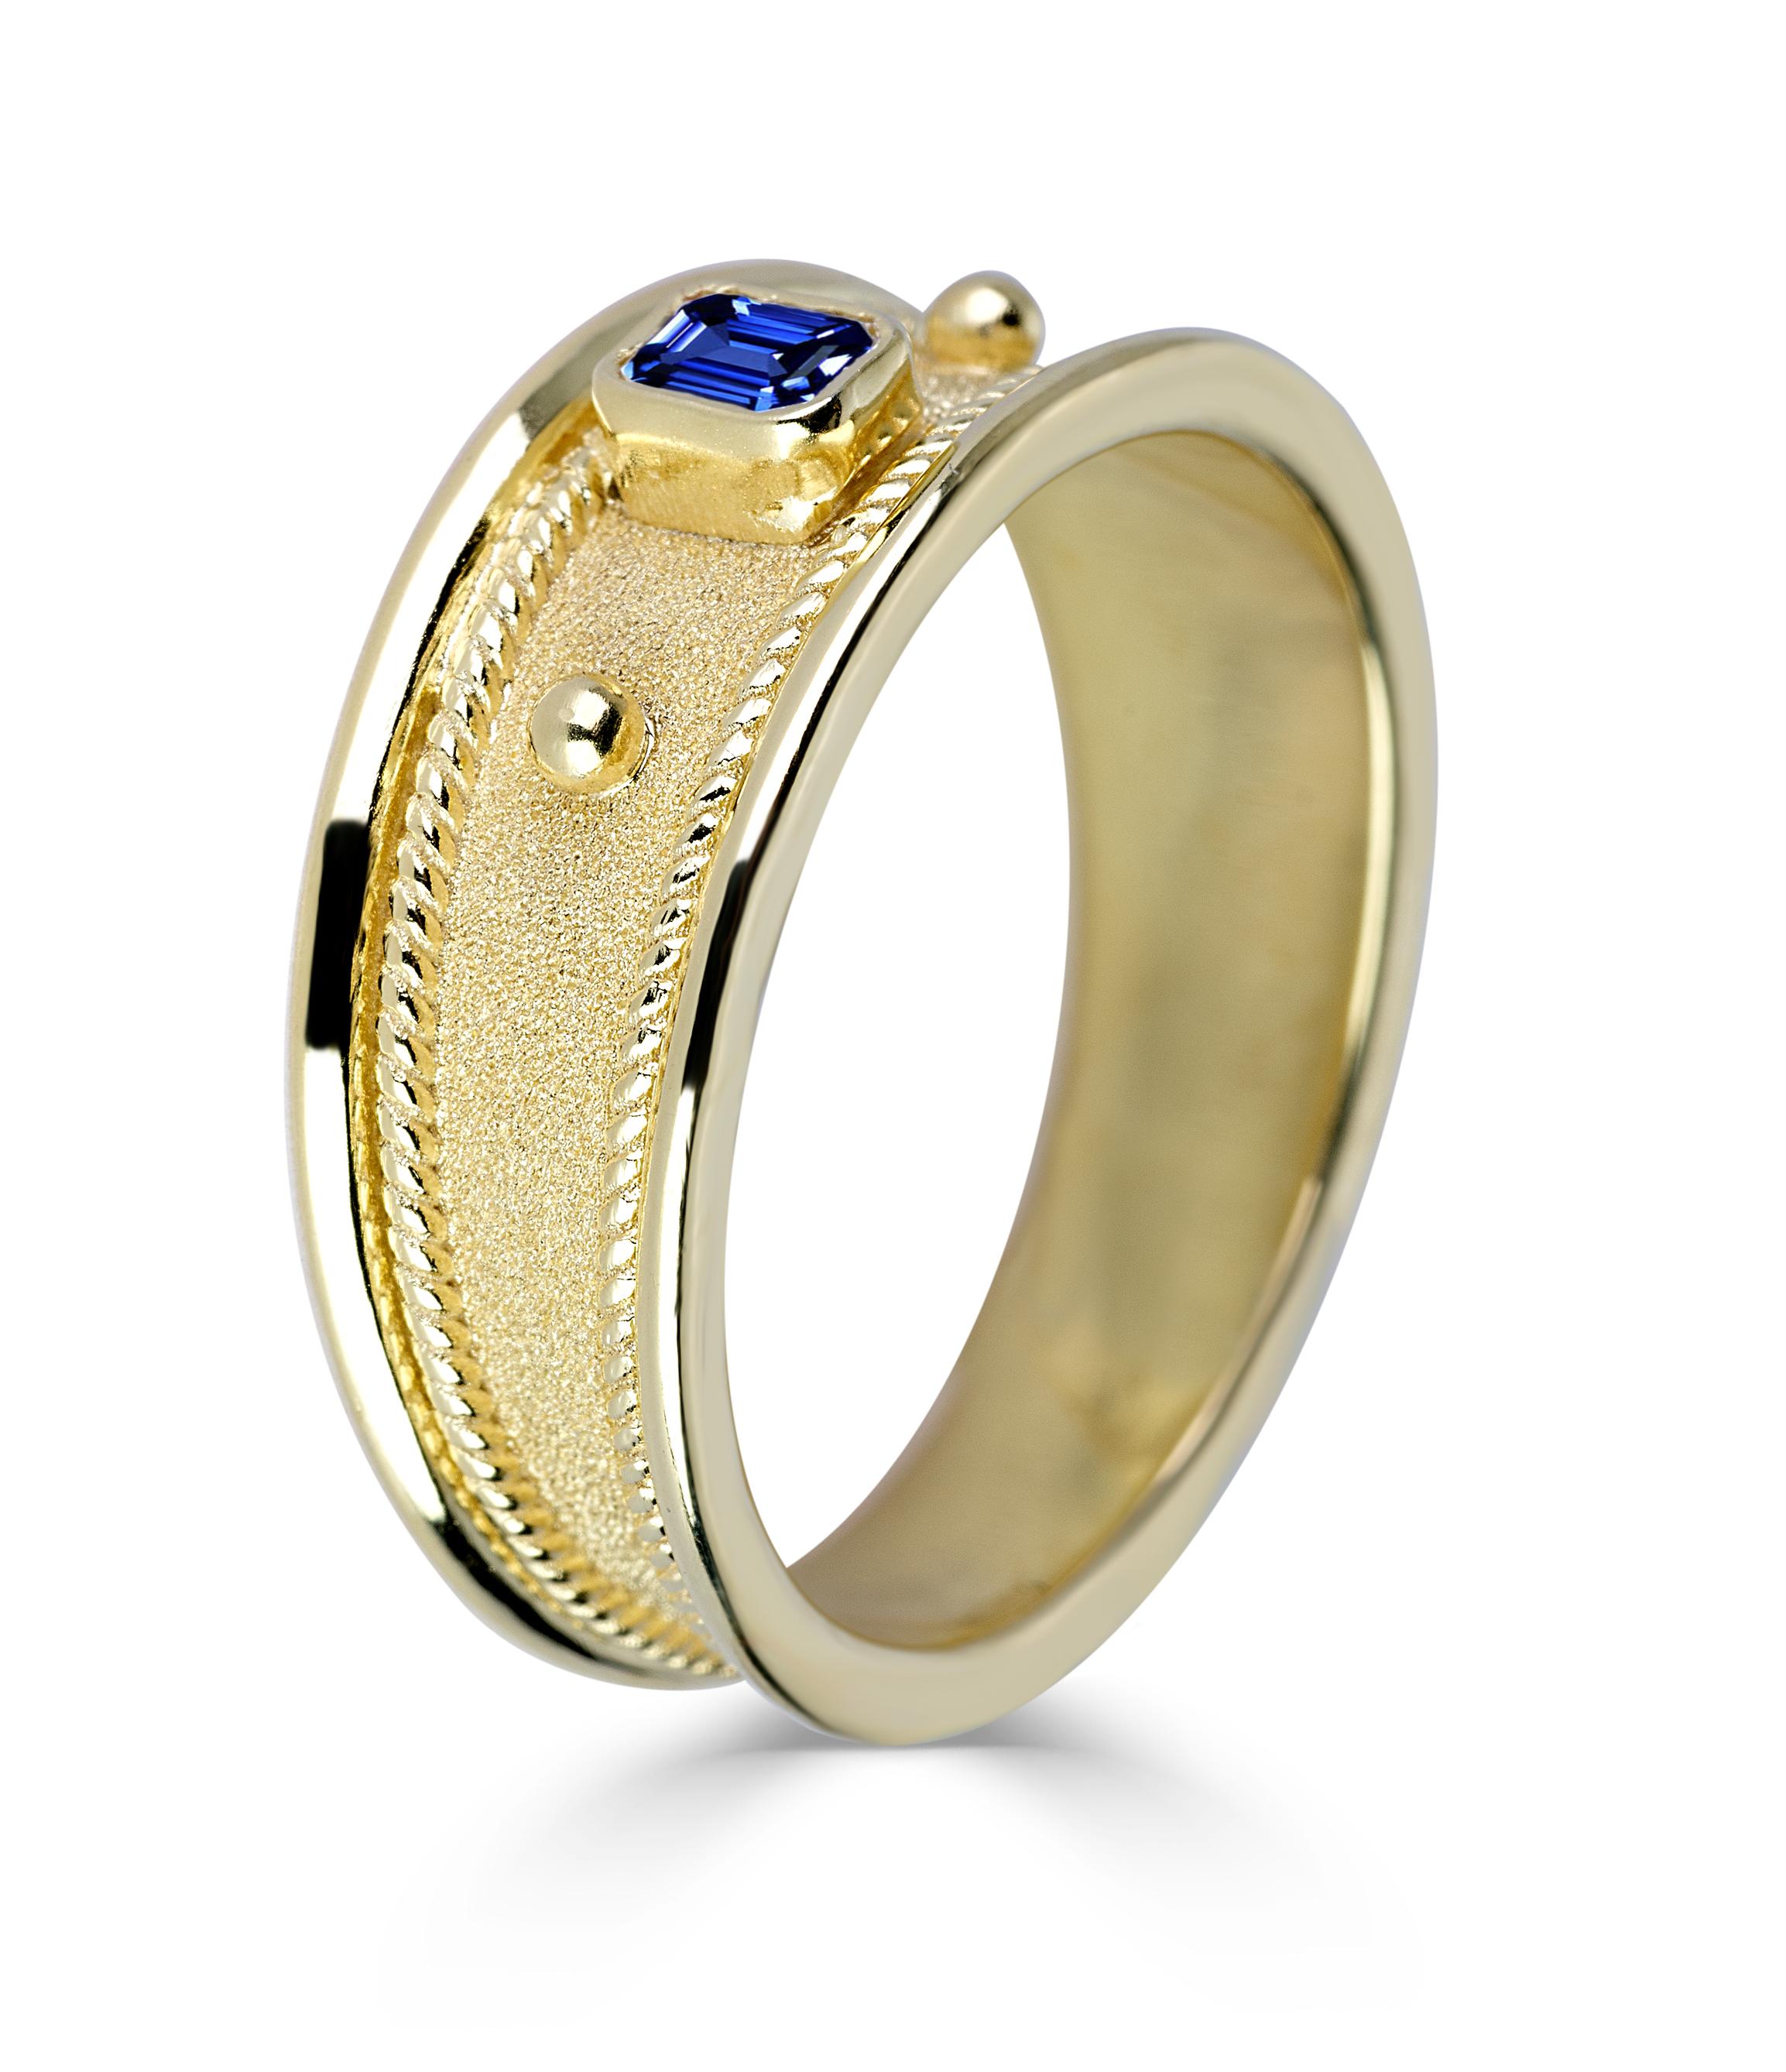 S.Georgios designer band ring in solid 18 Karat Yellow Gold all handmade with Byzantine workmanship and the unique velvet effect on the background. The granulation on this gorgeous ring has decorations of 22 Karat solid gold. This stunning unisex